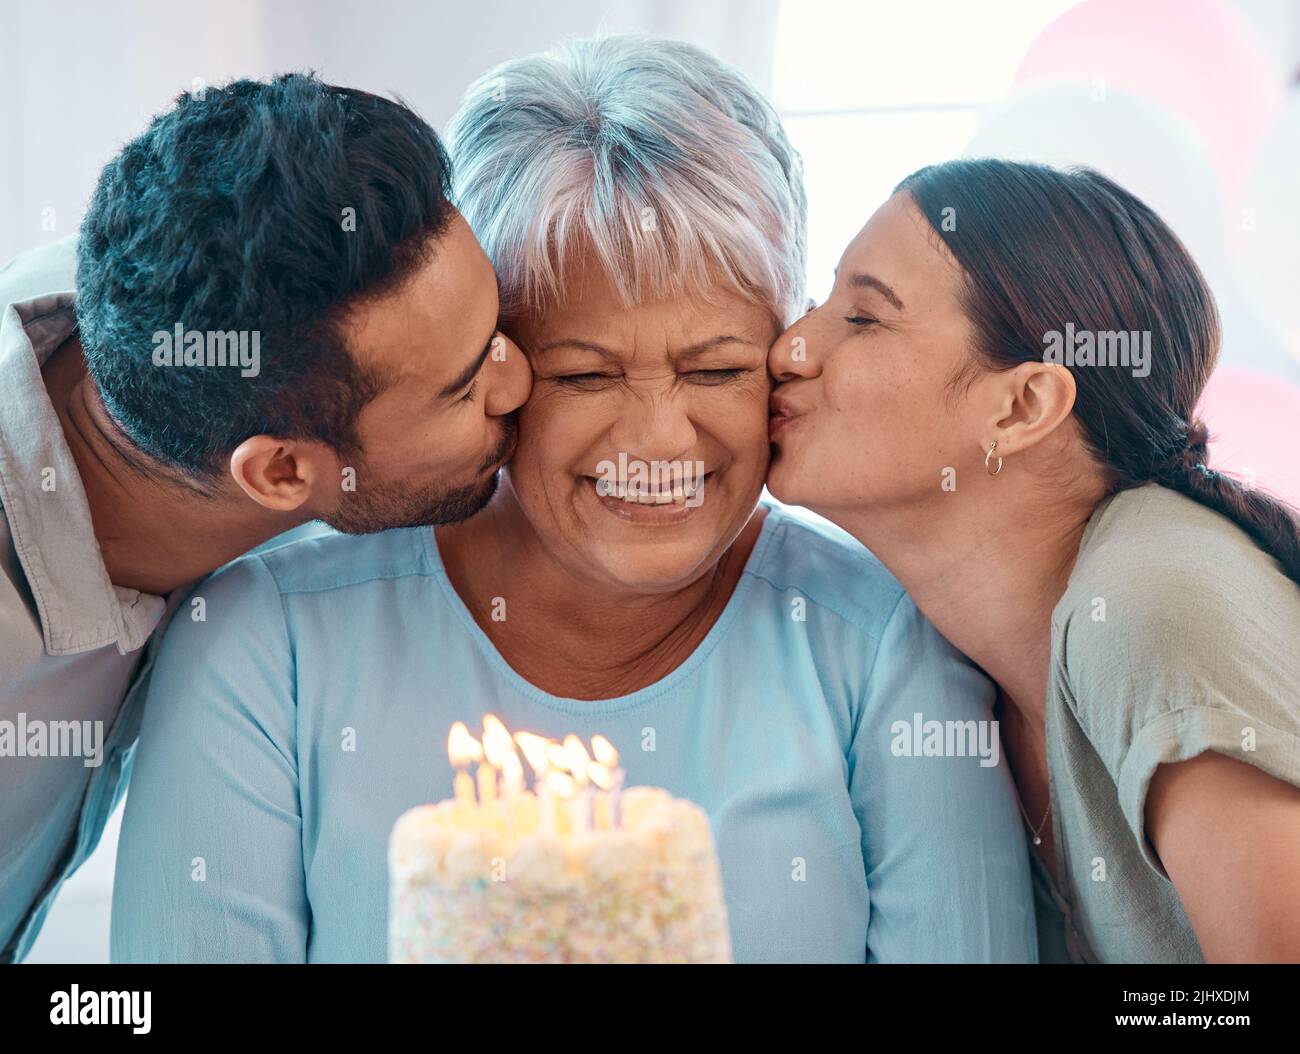 Youre our gift. two young adults celebrating a birthday with a mature woman at home. Stock Photo